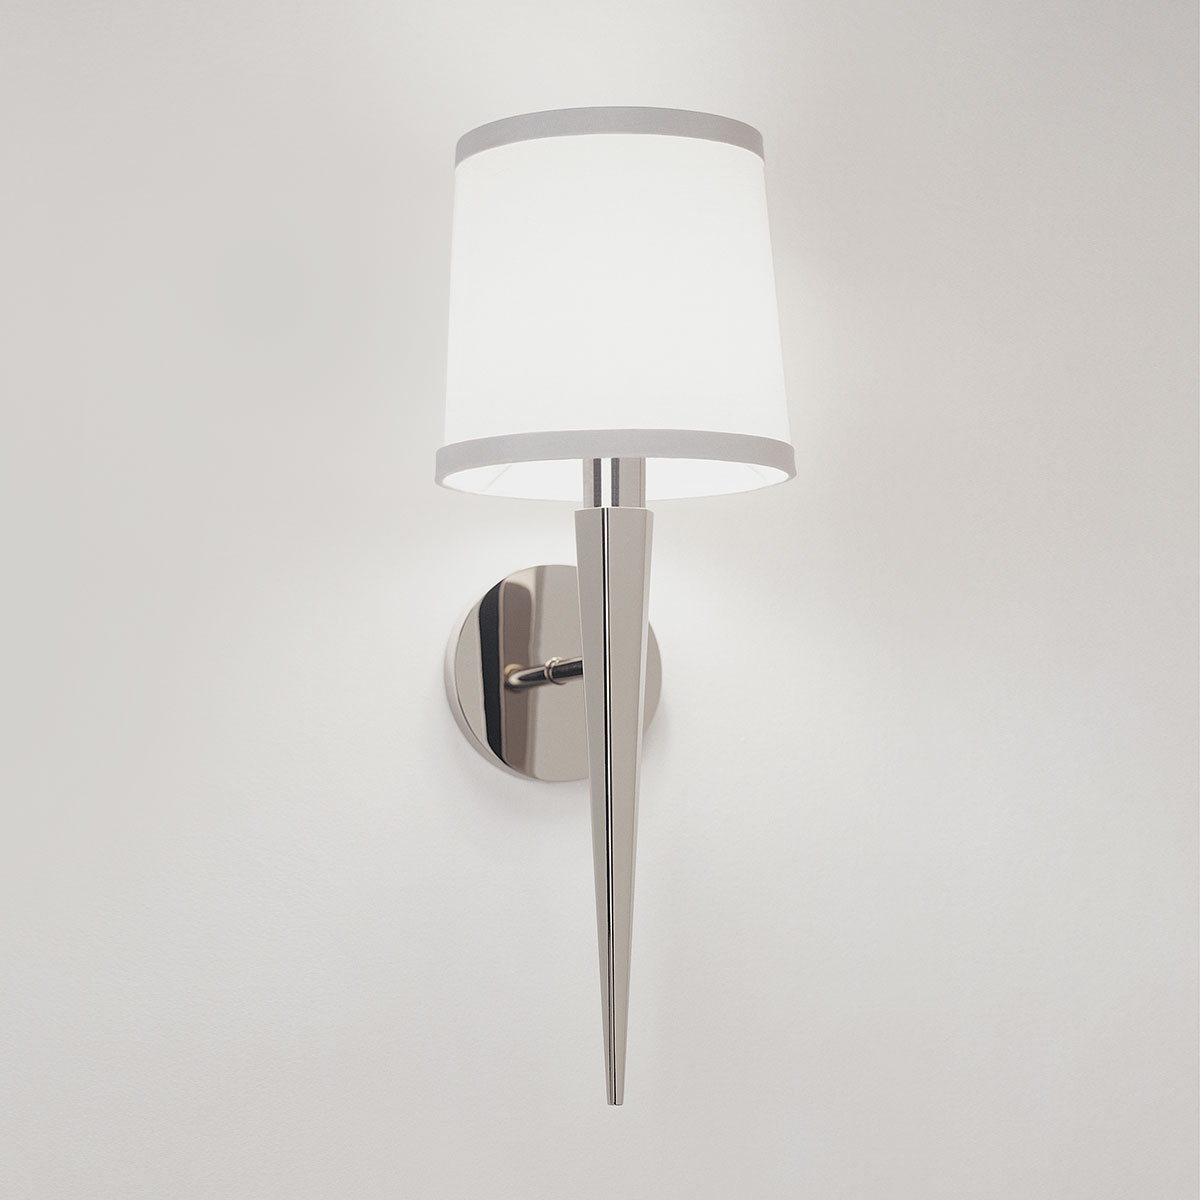 Pacific Heights Sconce